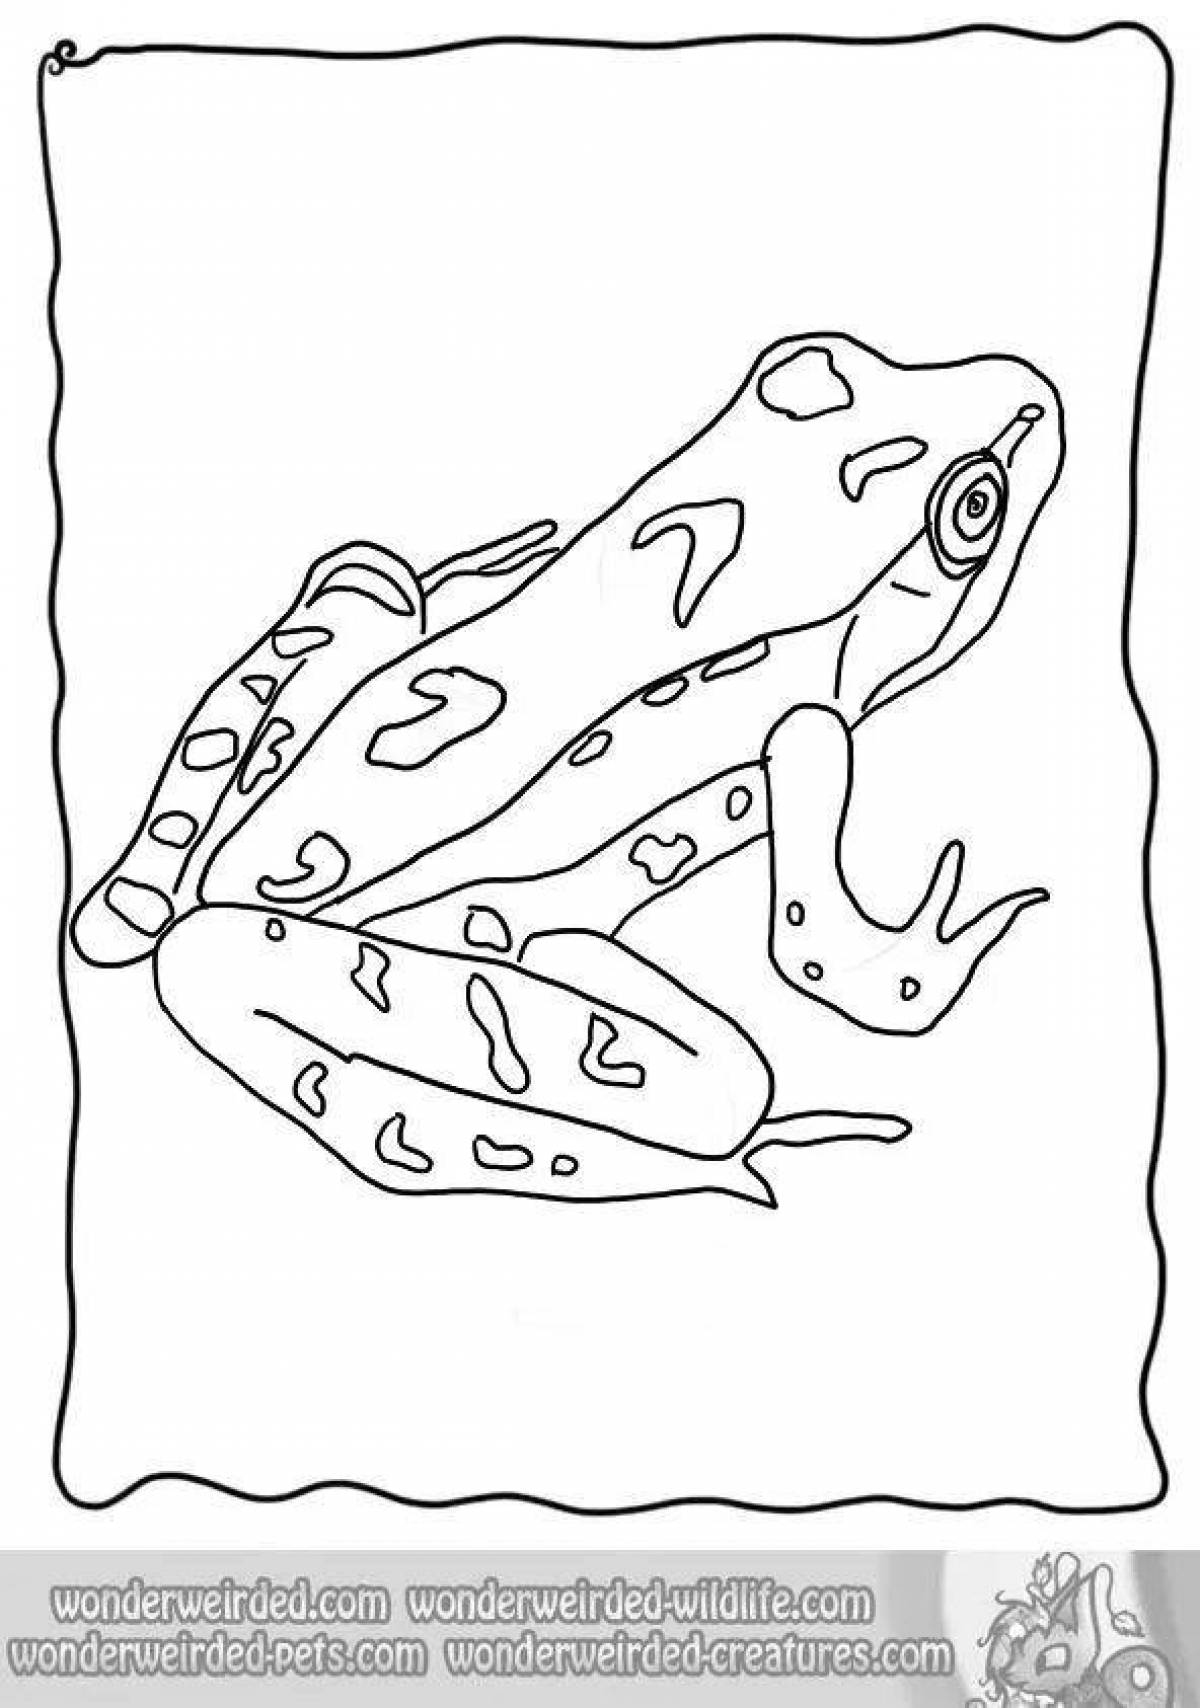 Glorious amphibian coloring page